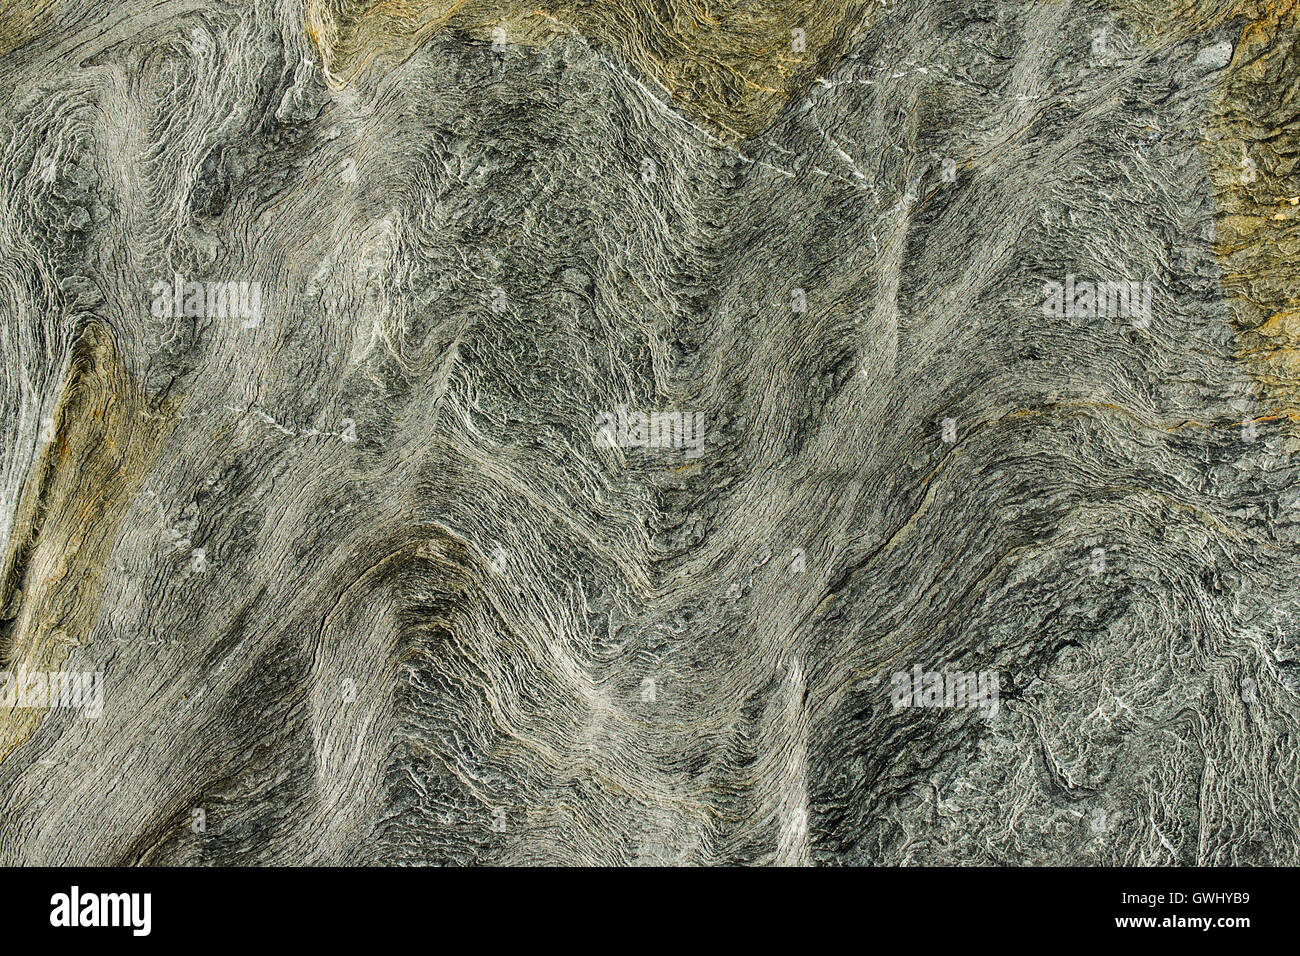 Closeup view of marks, lines and patterns in the eroded surface rock. Stock Photo